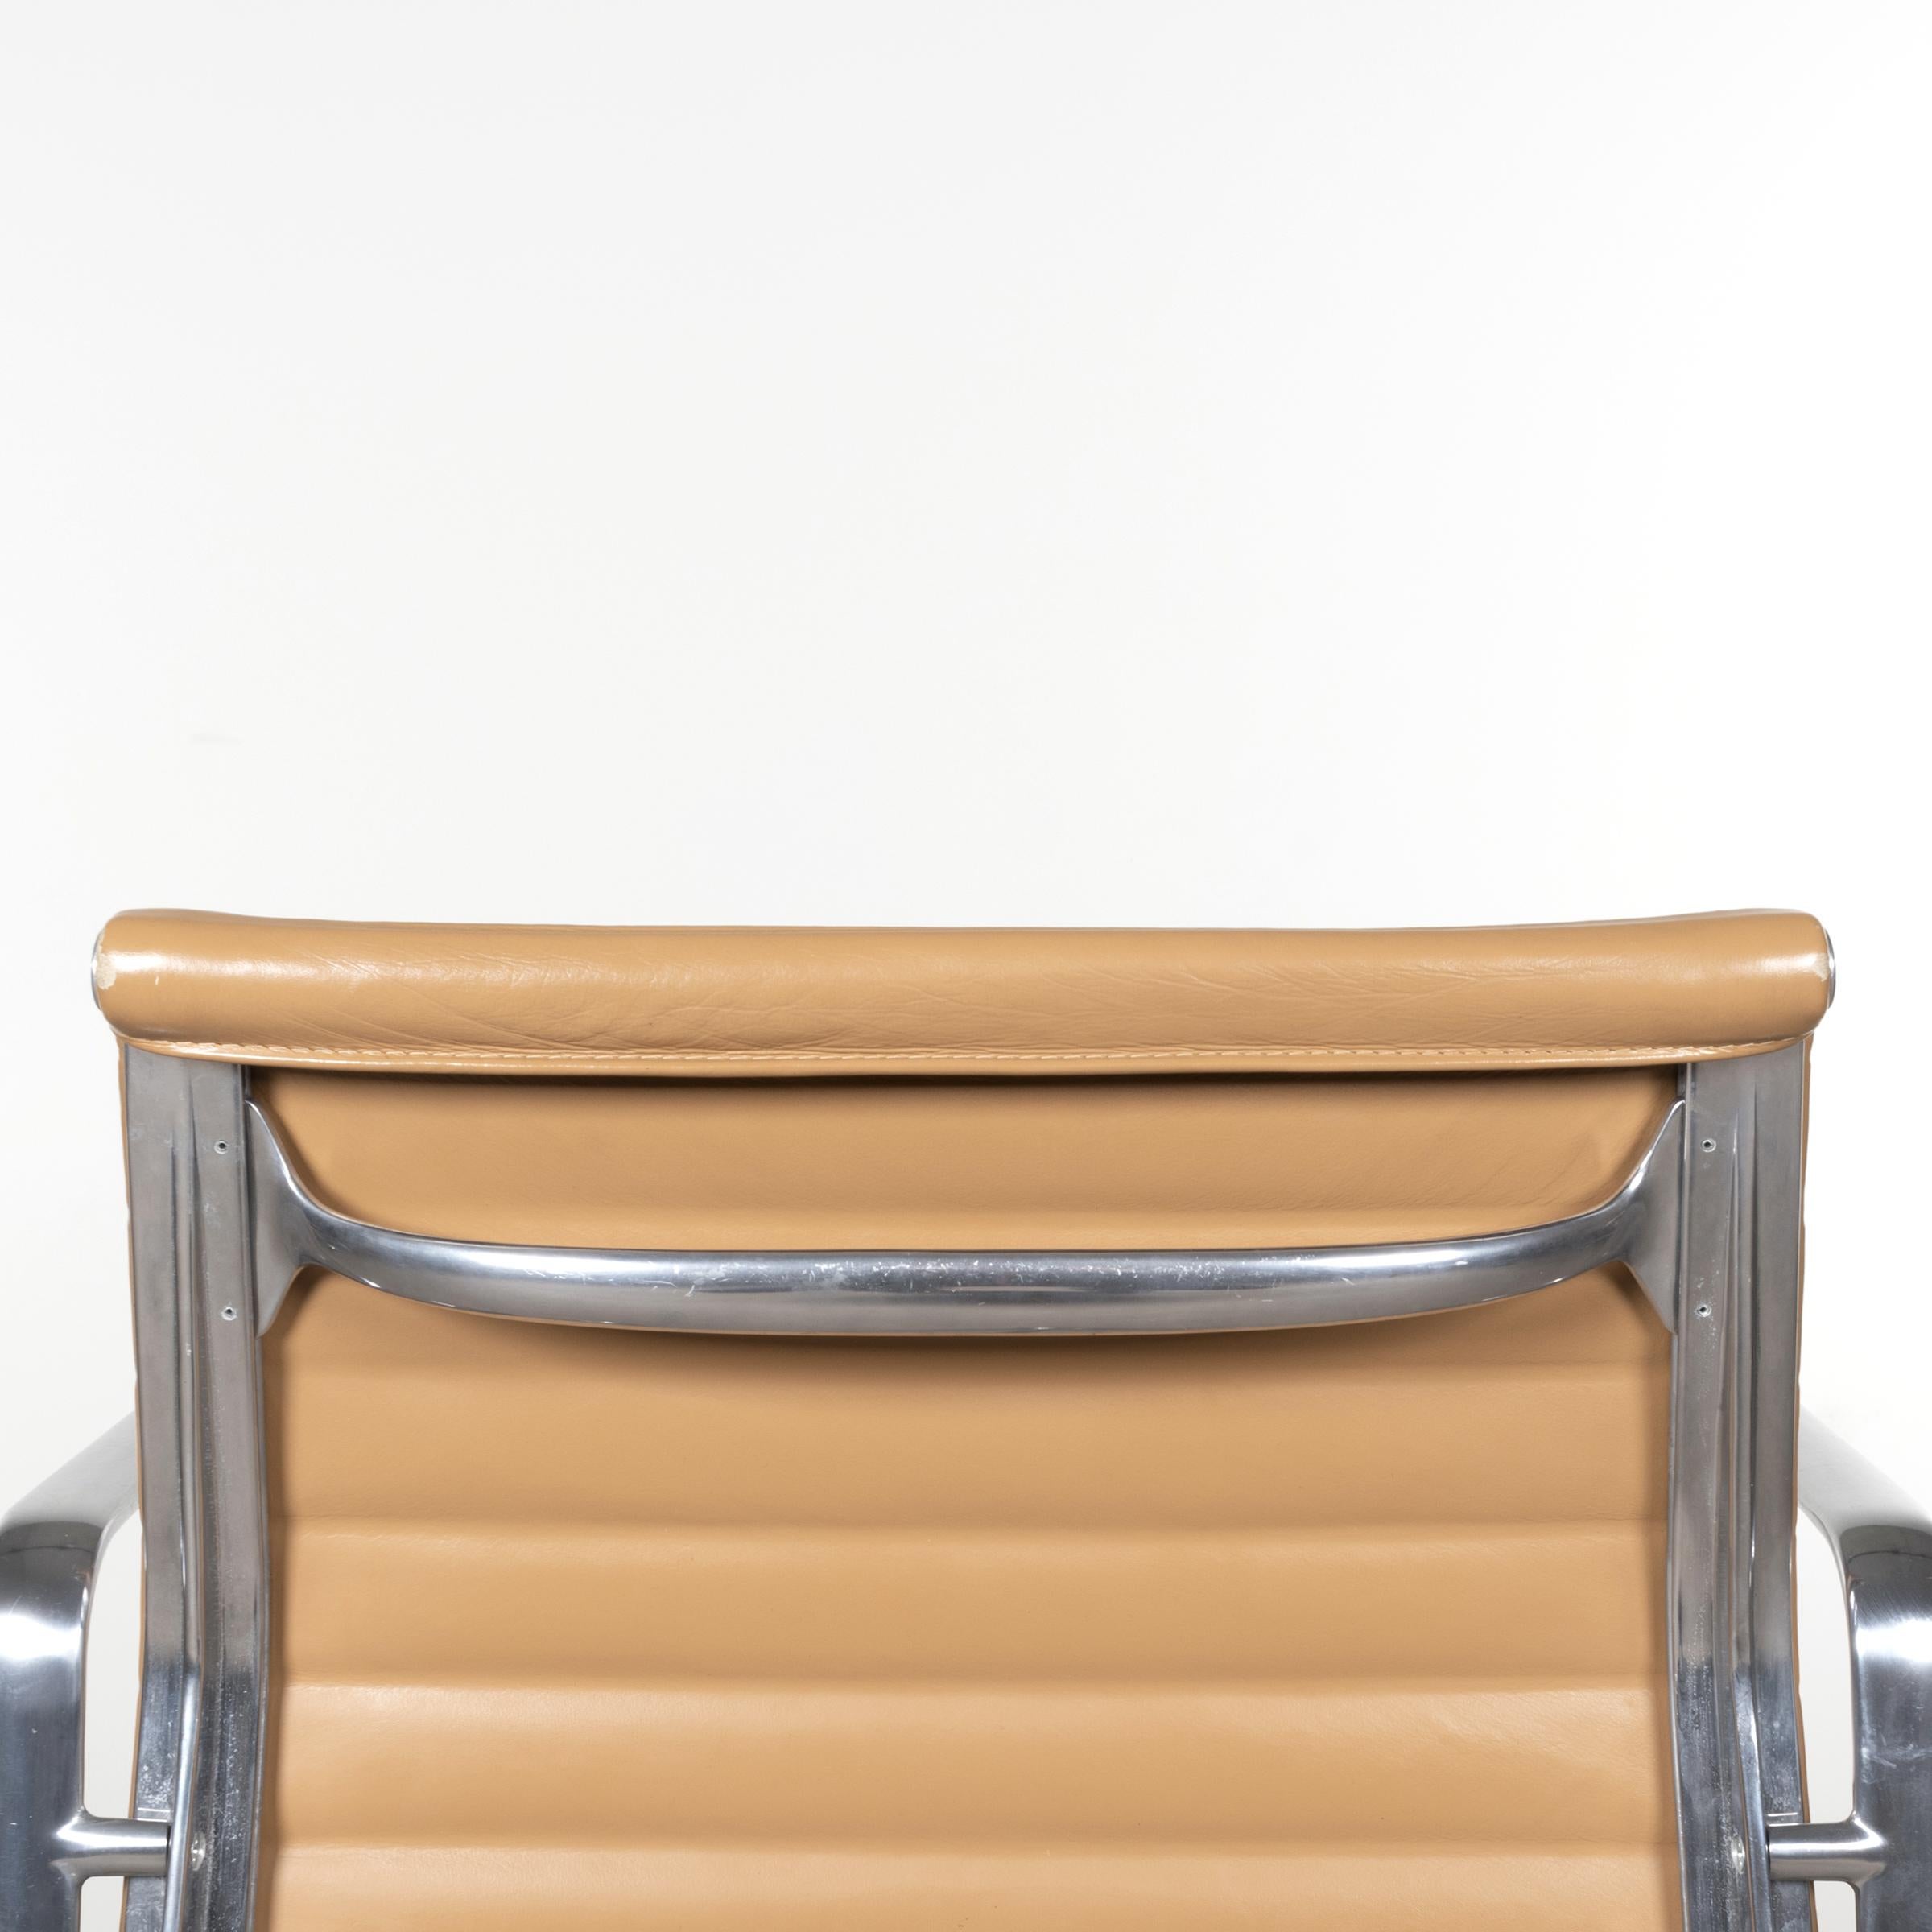 Eames Management Office Chair in Cognac Leather for Herman Miller, USA 6